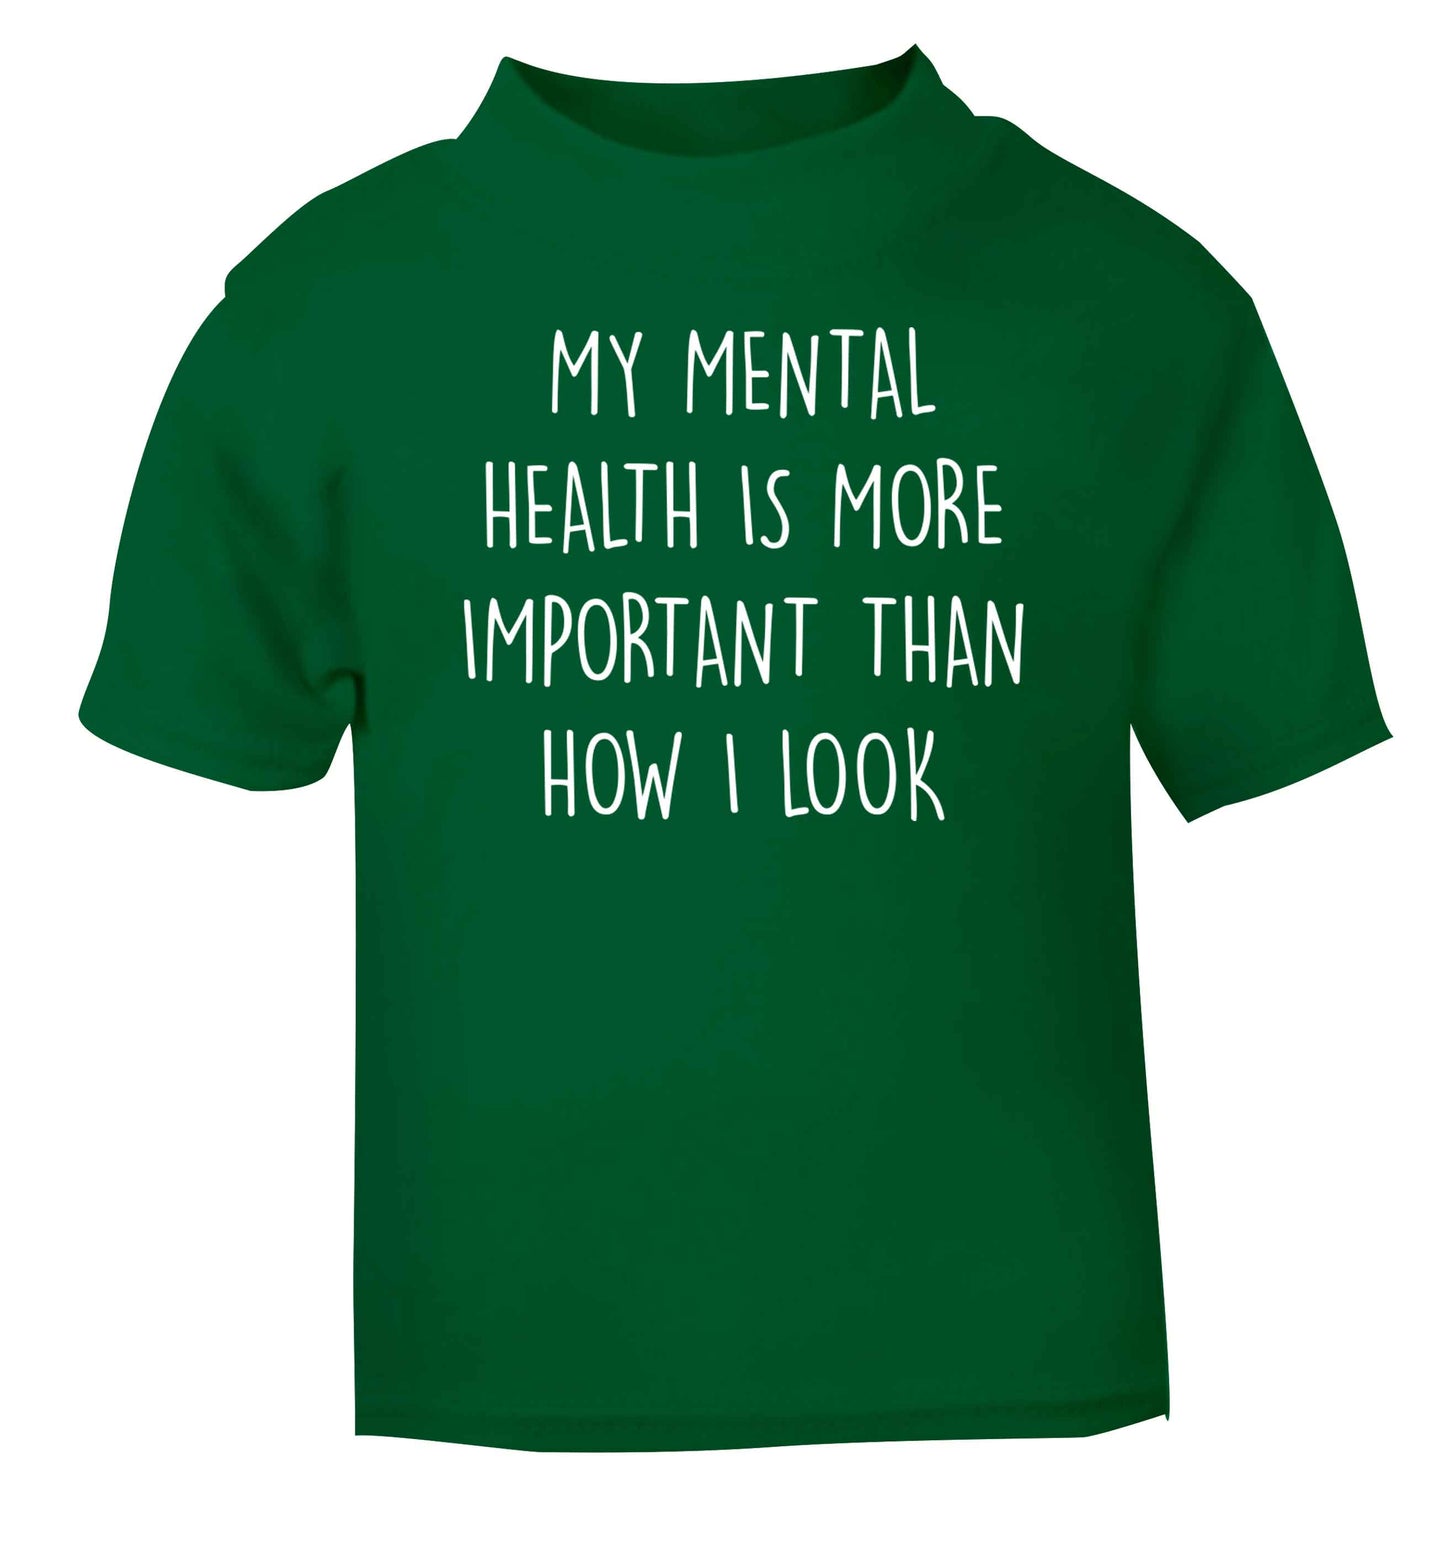 My mental health is more importnat than how I look green baby toddler Tshirt 2 Years